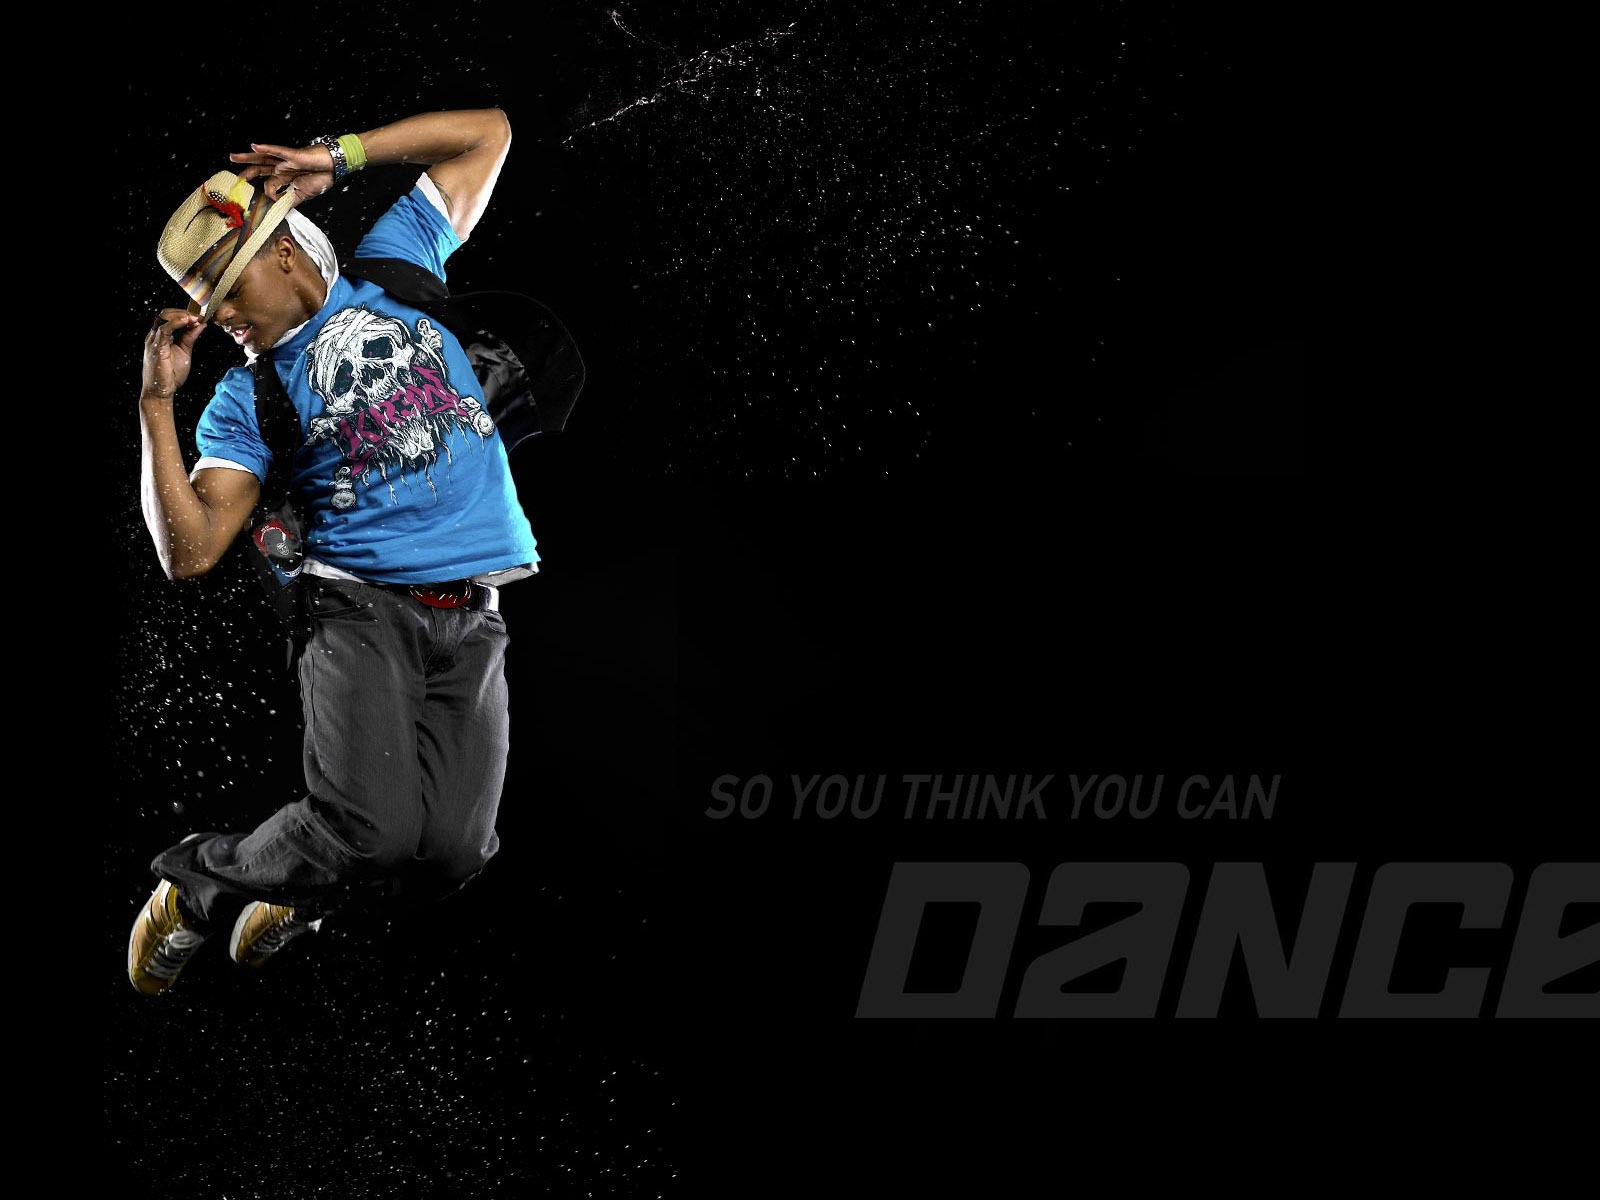 So You Think You Can Dance 舞林争霸 壁纸(一)20 - 1600x1200